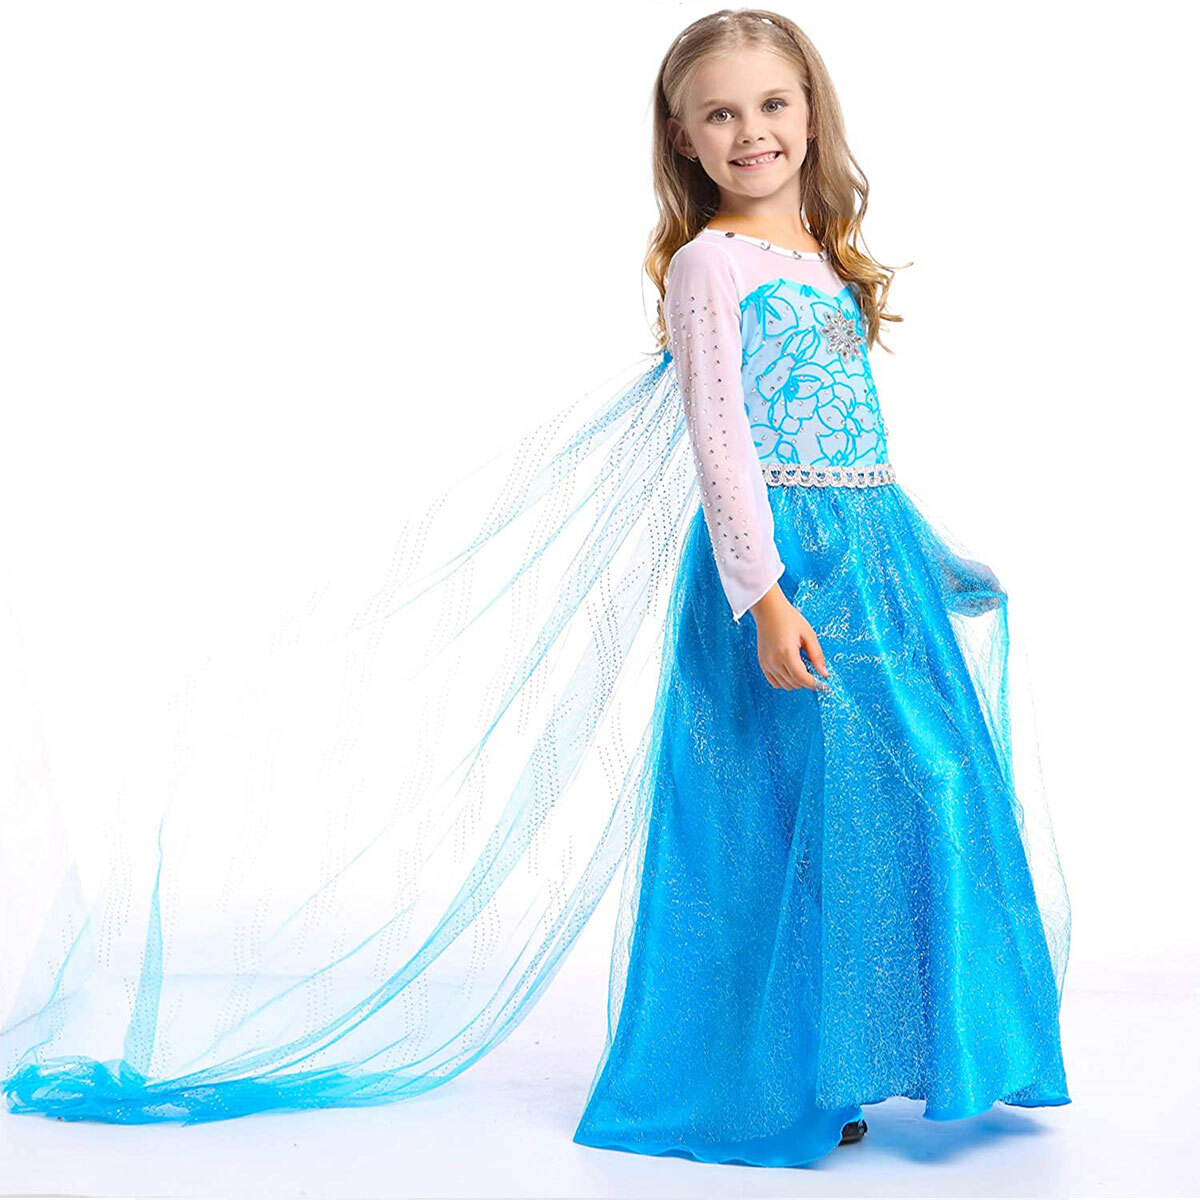 Girls Elsa Dress Snow Queen Princess Costume Party Dress up for 3-9 Year - image 3 of 8